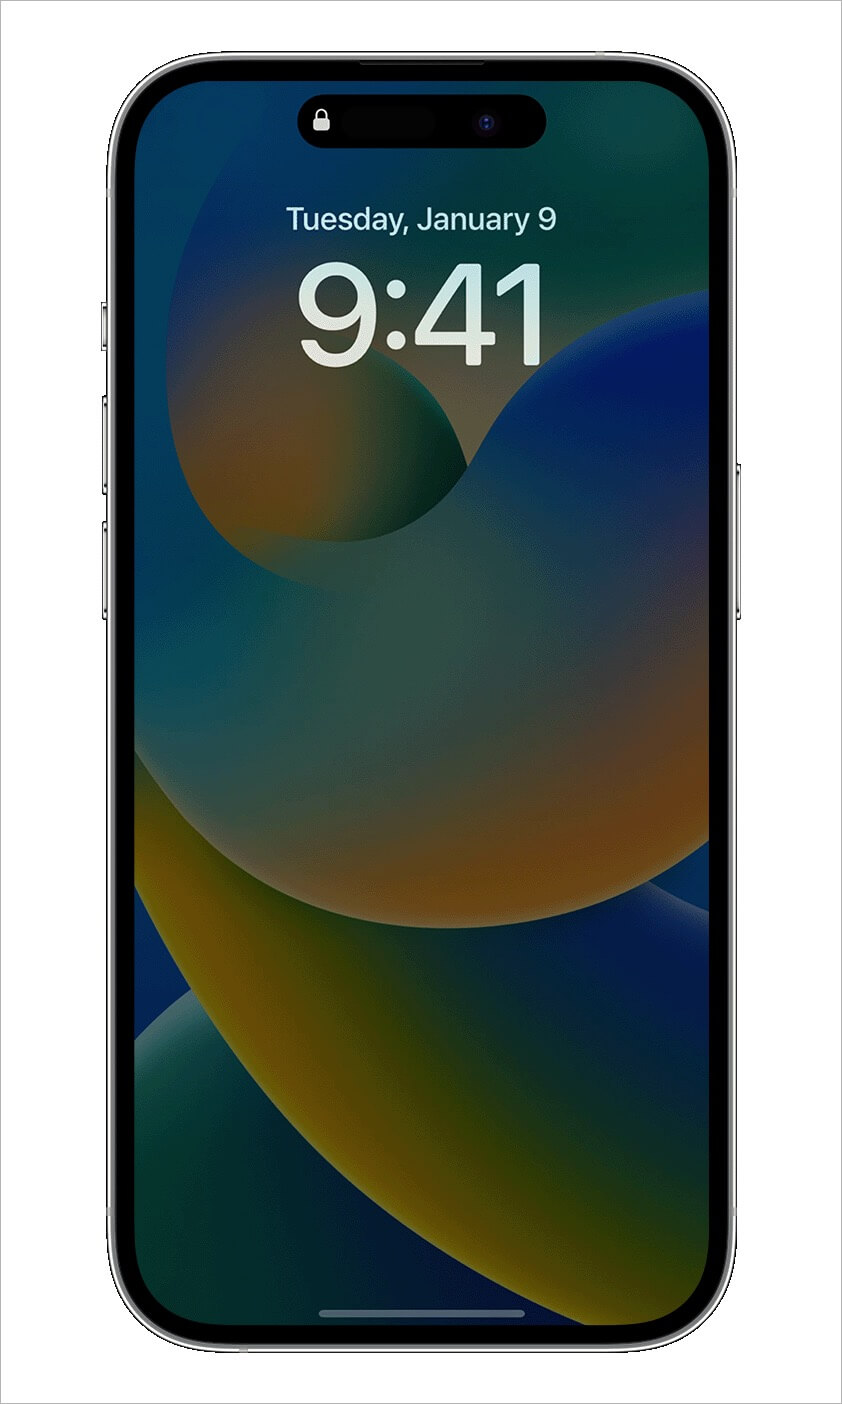 iphone 15 in Always-on Display mode